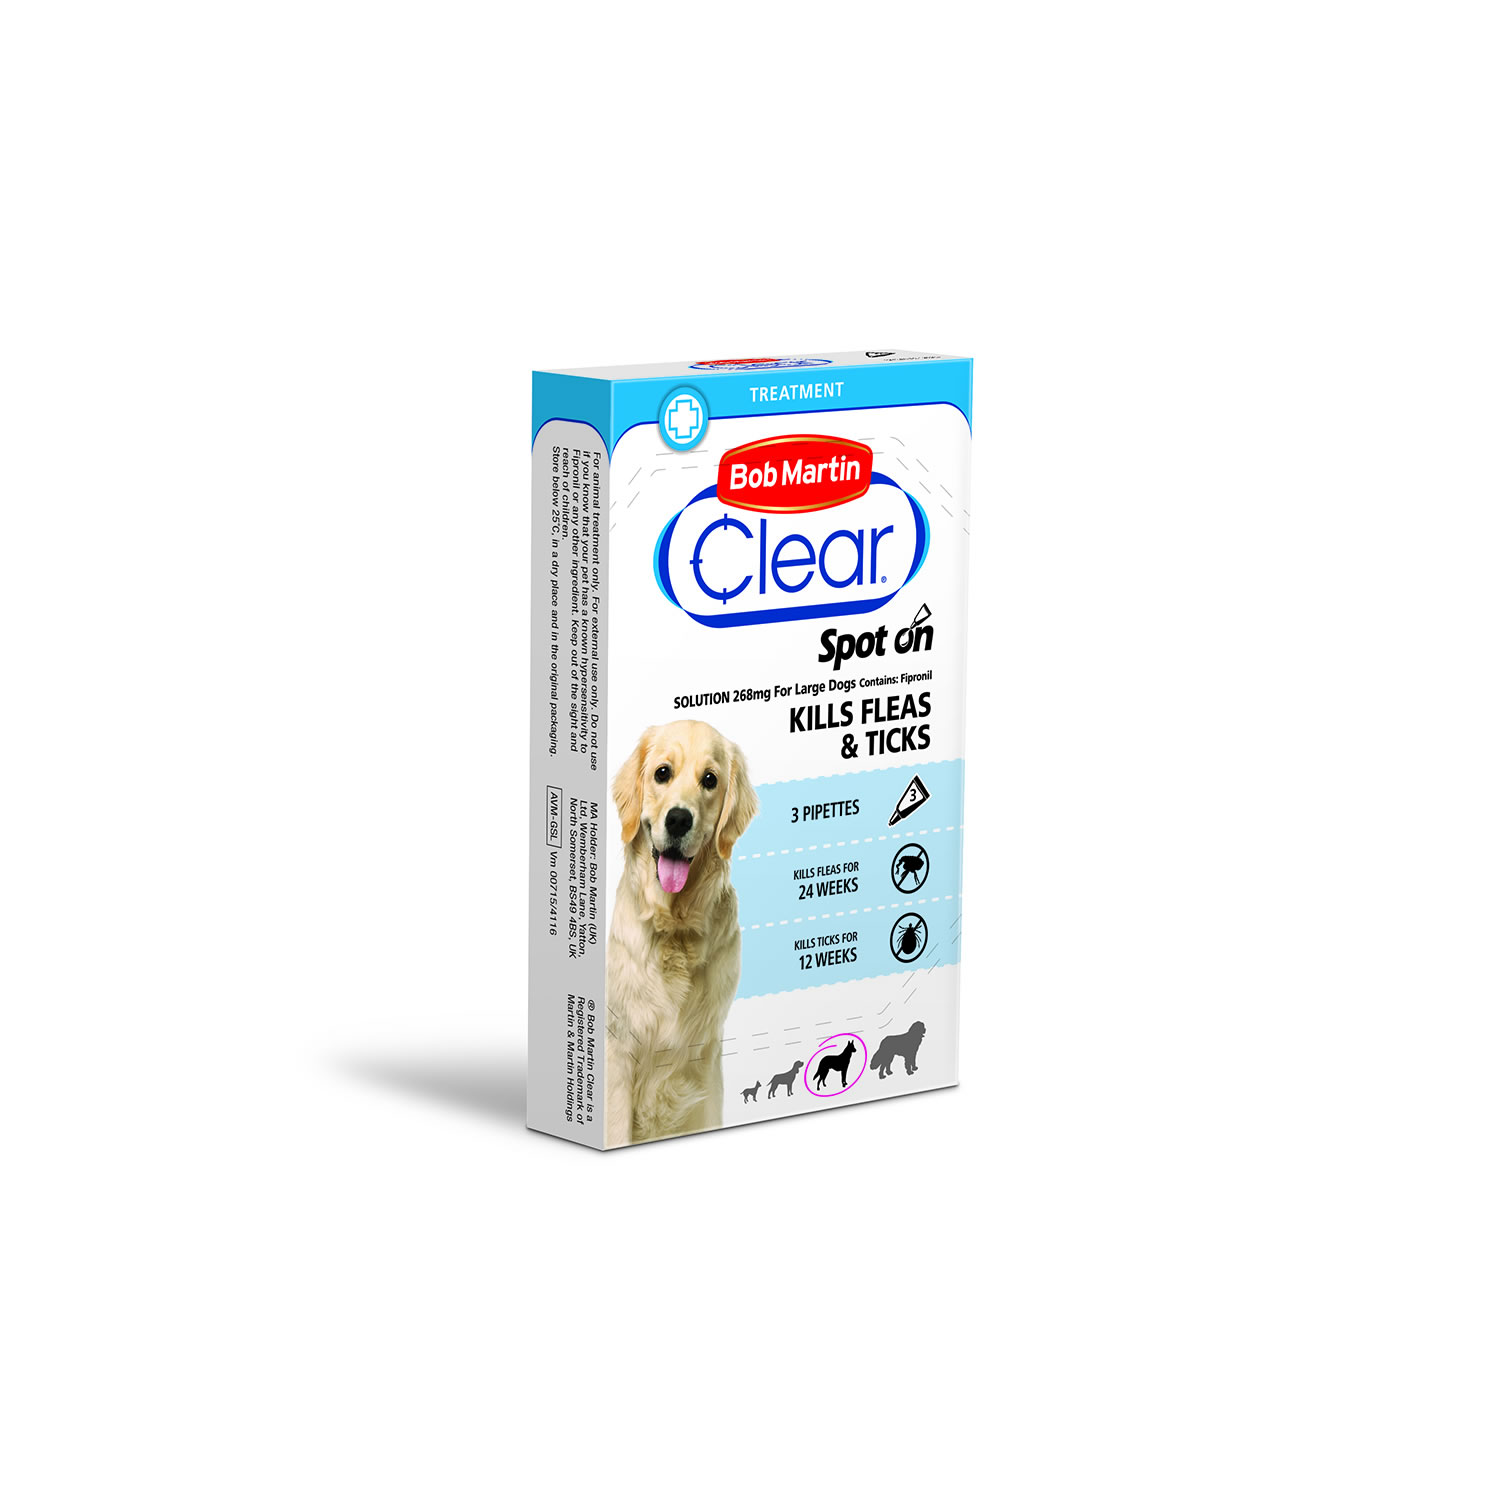 BOB MARTIN CLEAR SPOT ON FOR LARGE DOGS 20-40KG BOB MARTIN CLEAR SPOT ON FOR LARGE DOGS 20-40KG 3 TUBES  3 TUBES